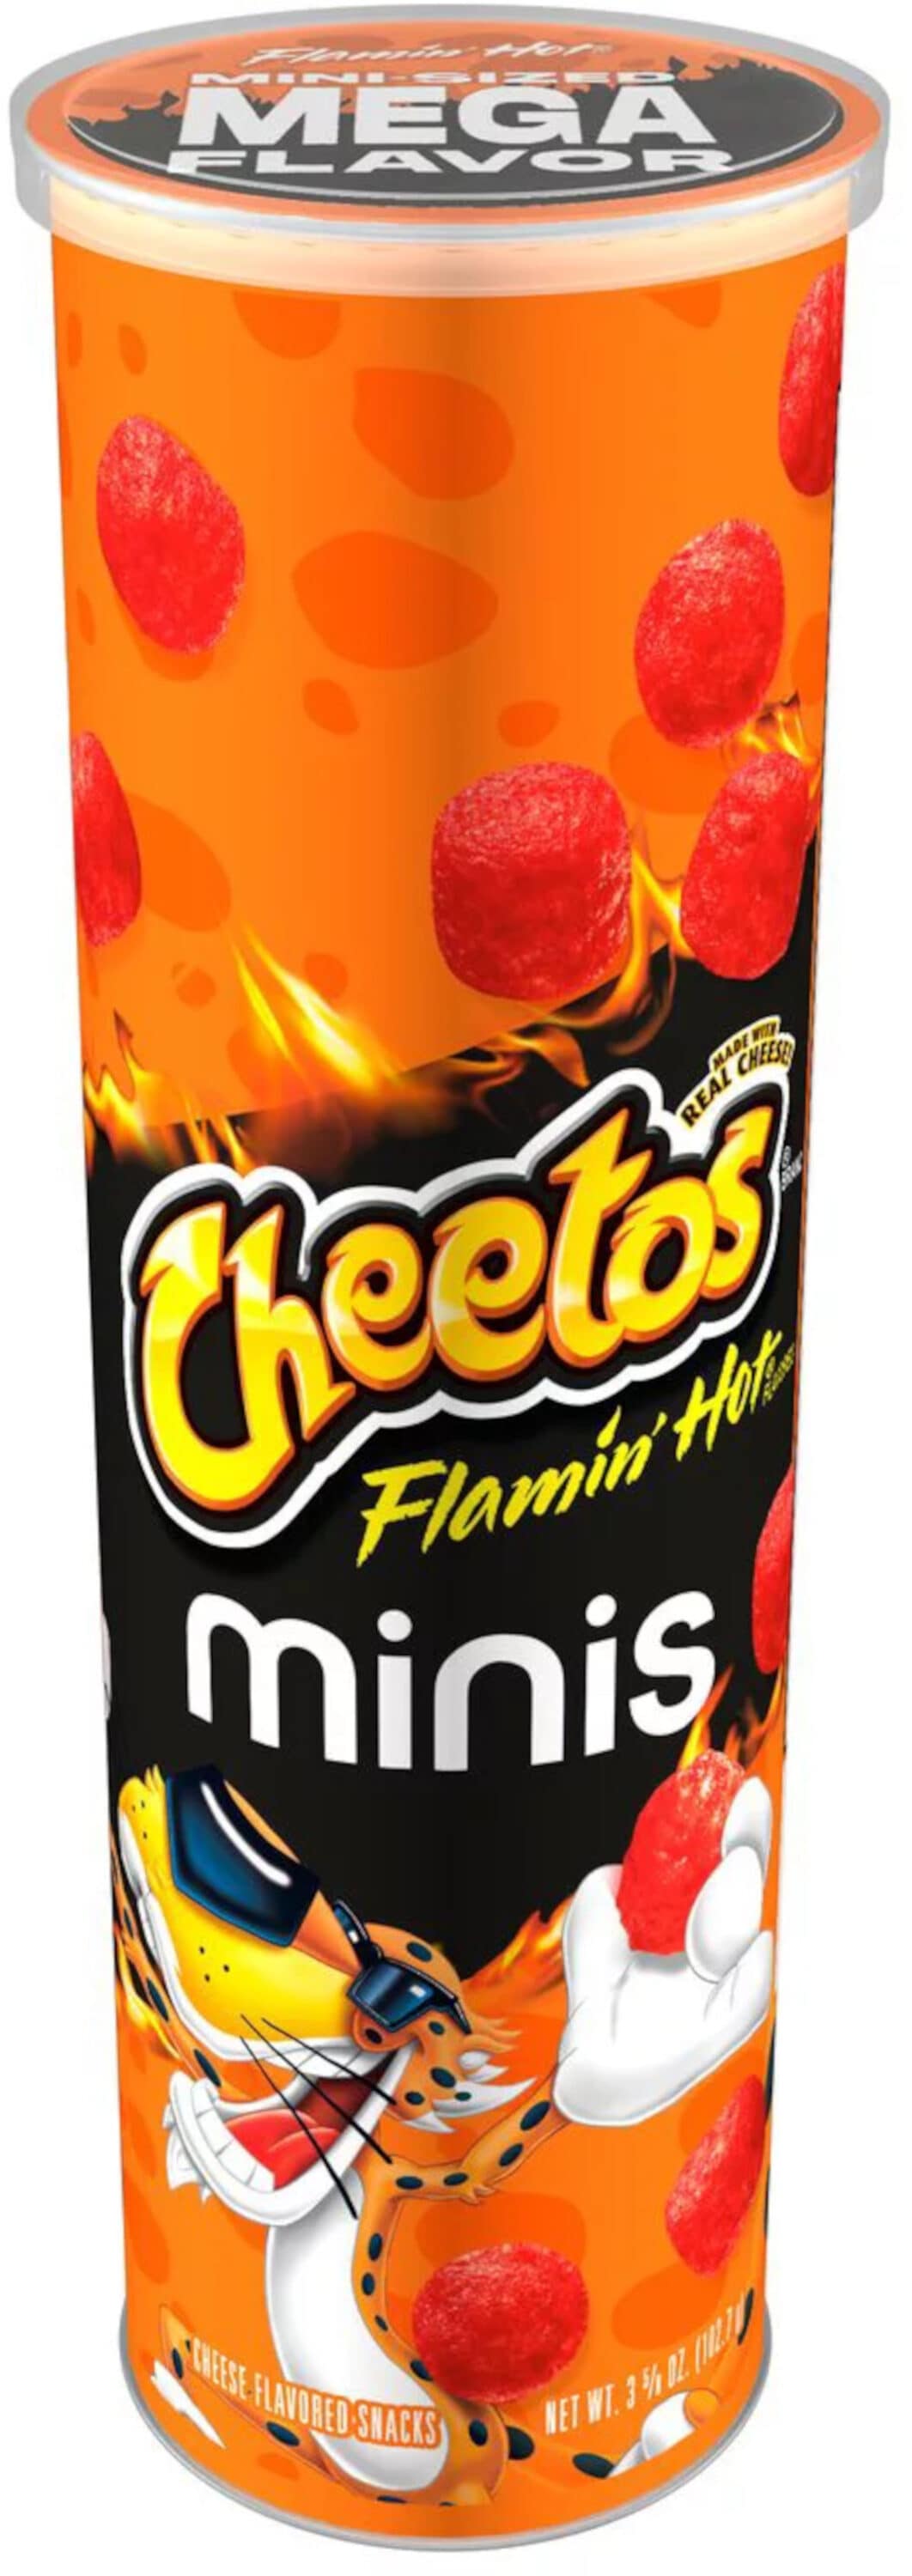 Cheetos Puffs Cheese Flavored Snacks, 1.375 Ounce (Pack of 64)